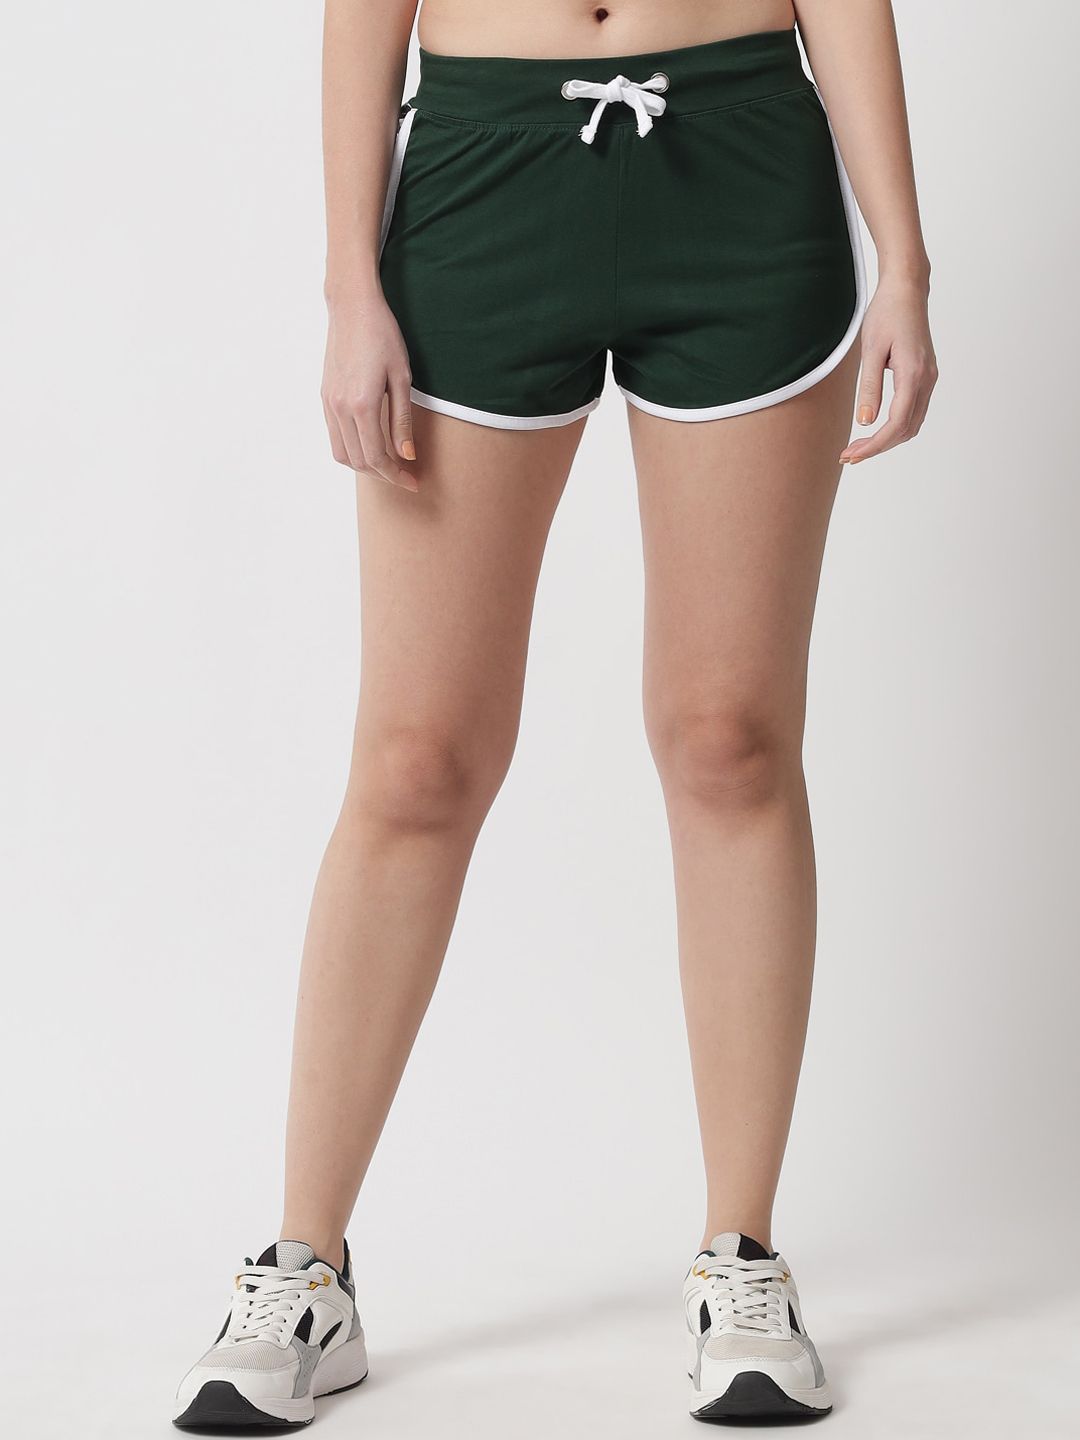 The Dry State Women Green Loose Fit Outdoor Hot Pants Cotton Shorts Price in India